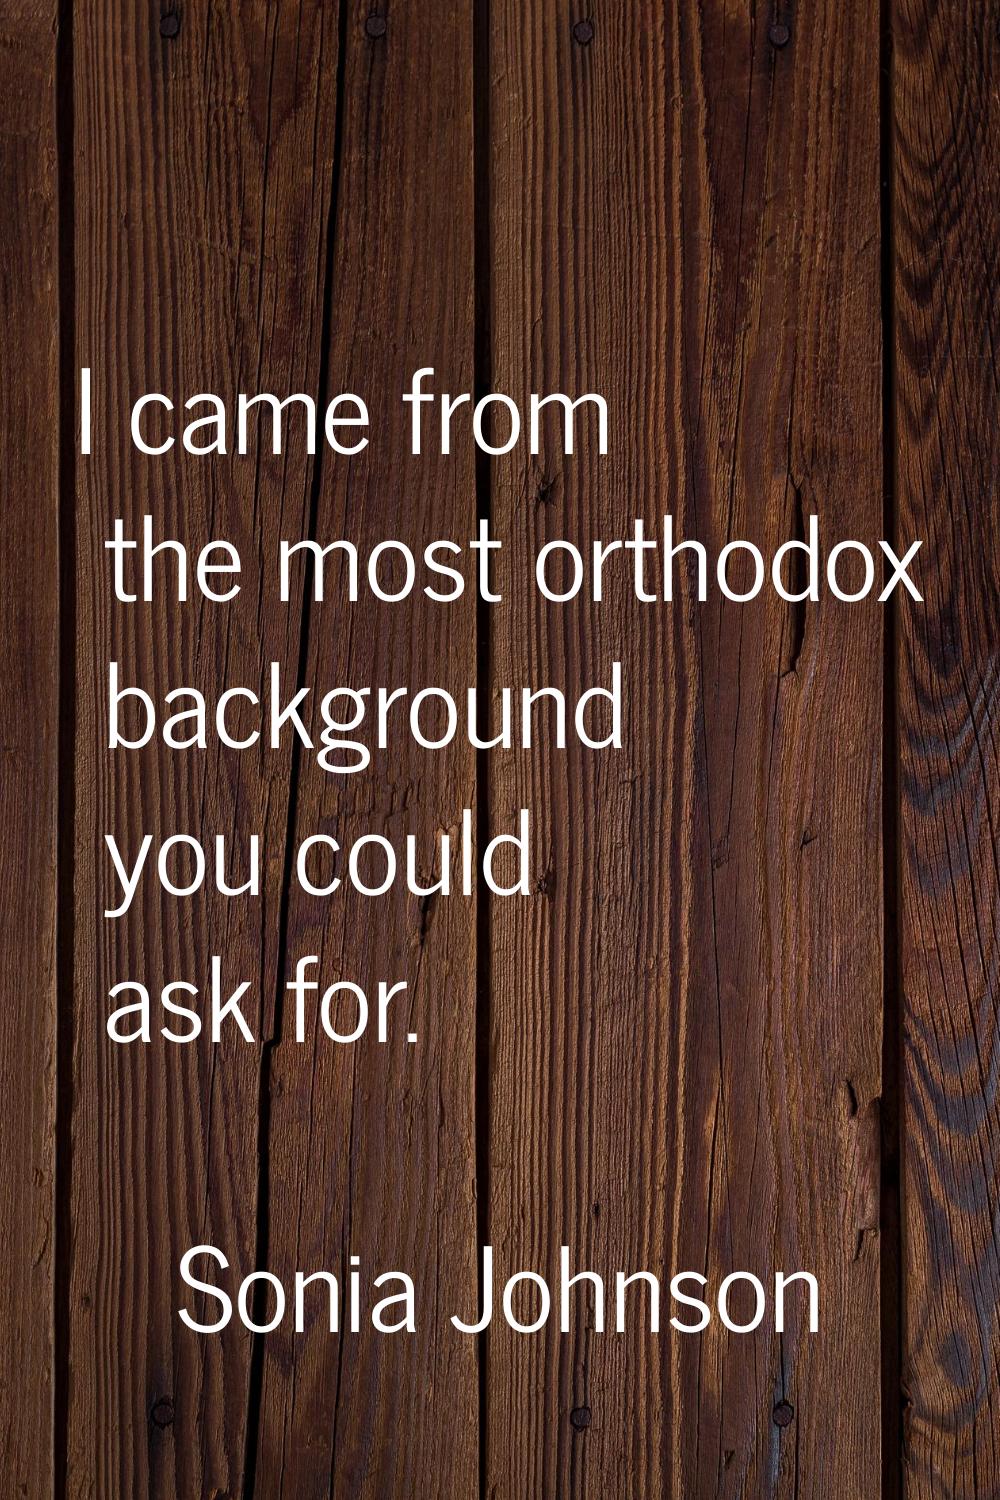 I came from the most orthodox background you could ask for.